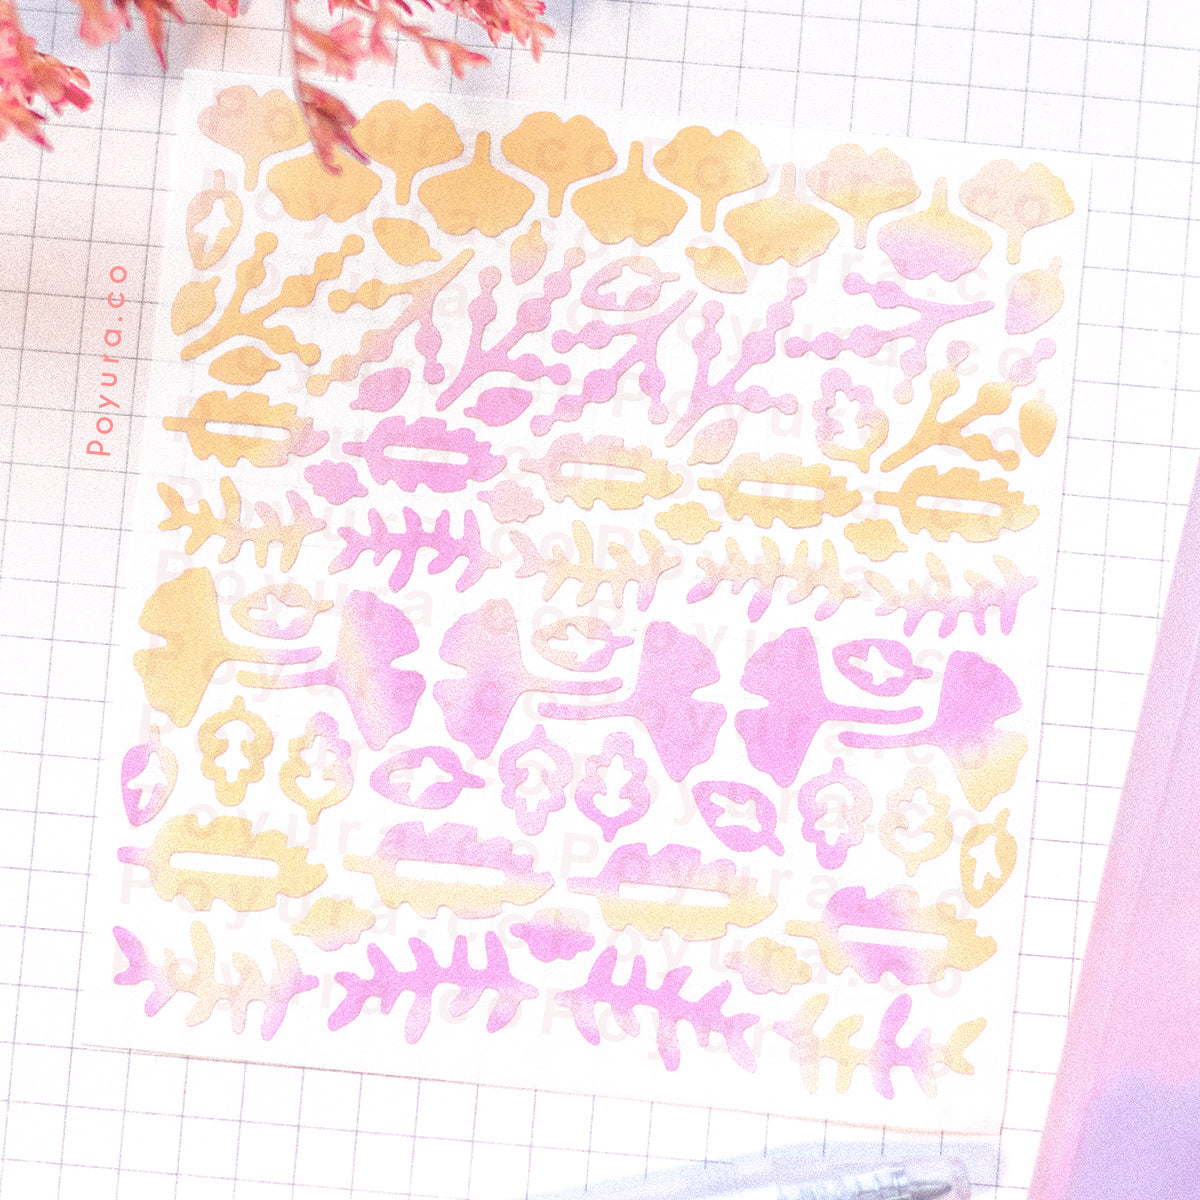 Leaves deco sticker sheet mini filler tiny small confetti deco kpop polco polariod toploader aesthetic cute bullet journal bujo planner anime diary scrapbook spread sticker sheet flower houseplant plant leaf leaves floral flower nature tree ginkgo twig fall foliage